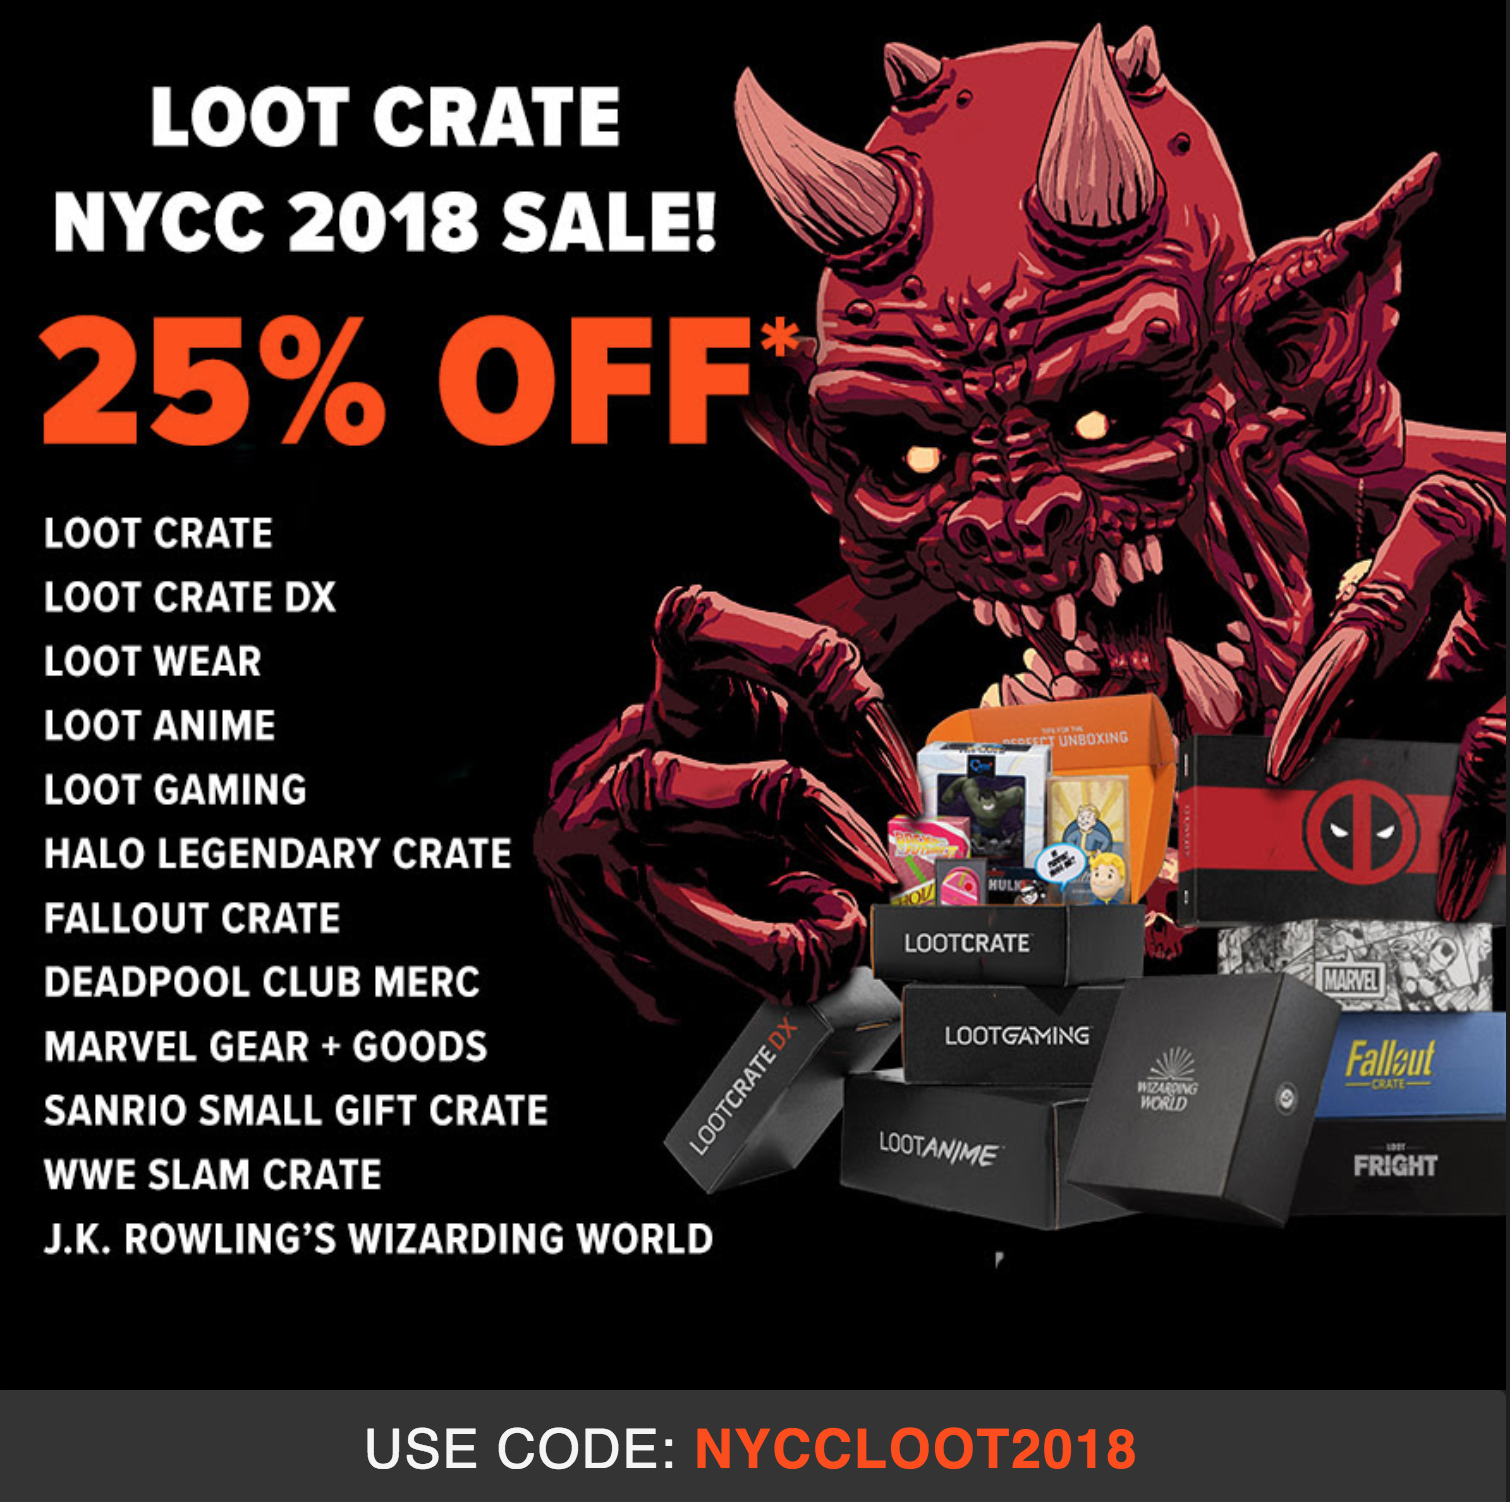 Loot Crate NYCC Sale – 25% Off Select Crates!